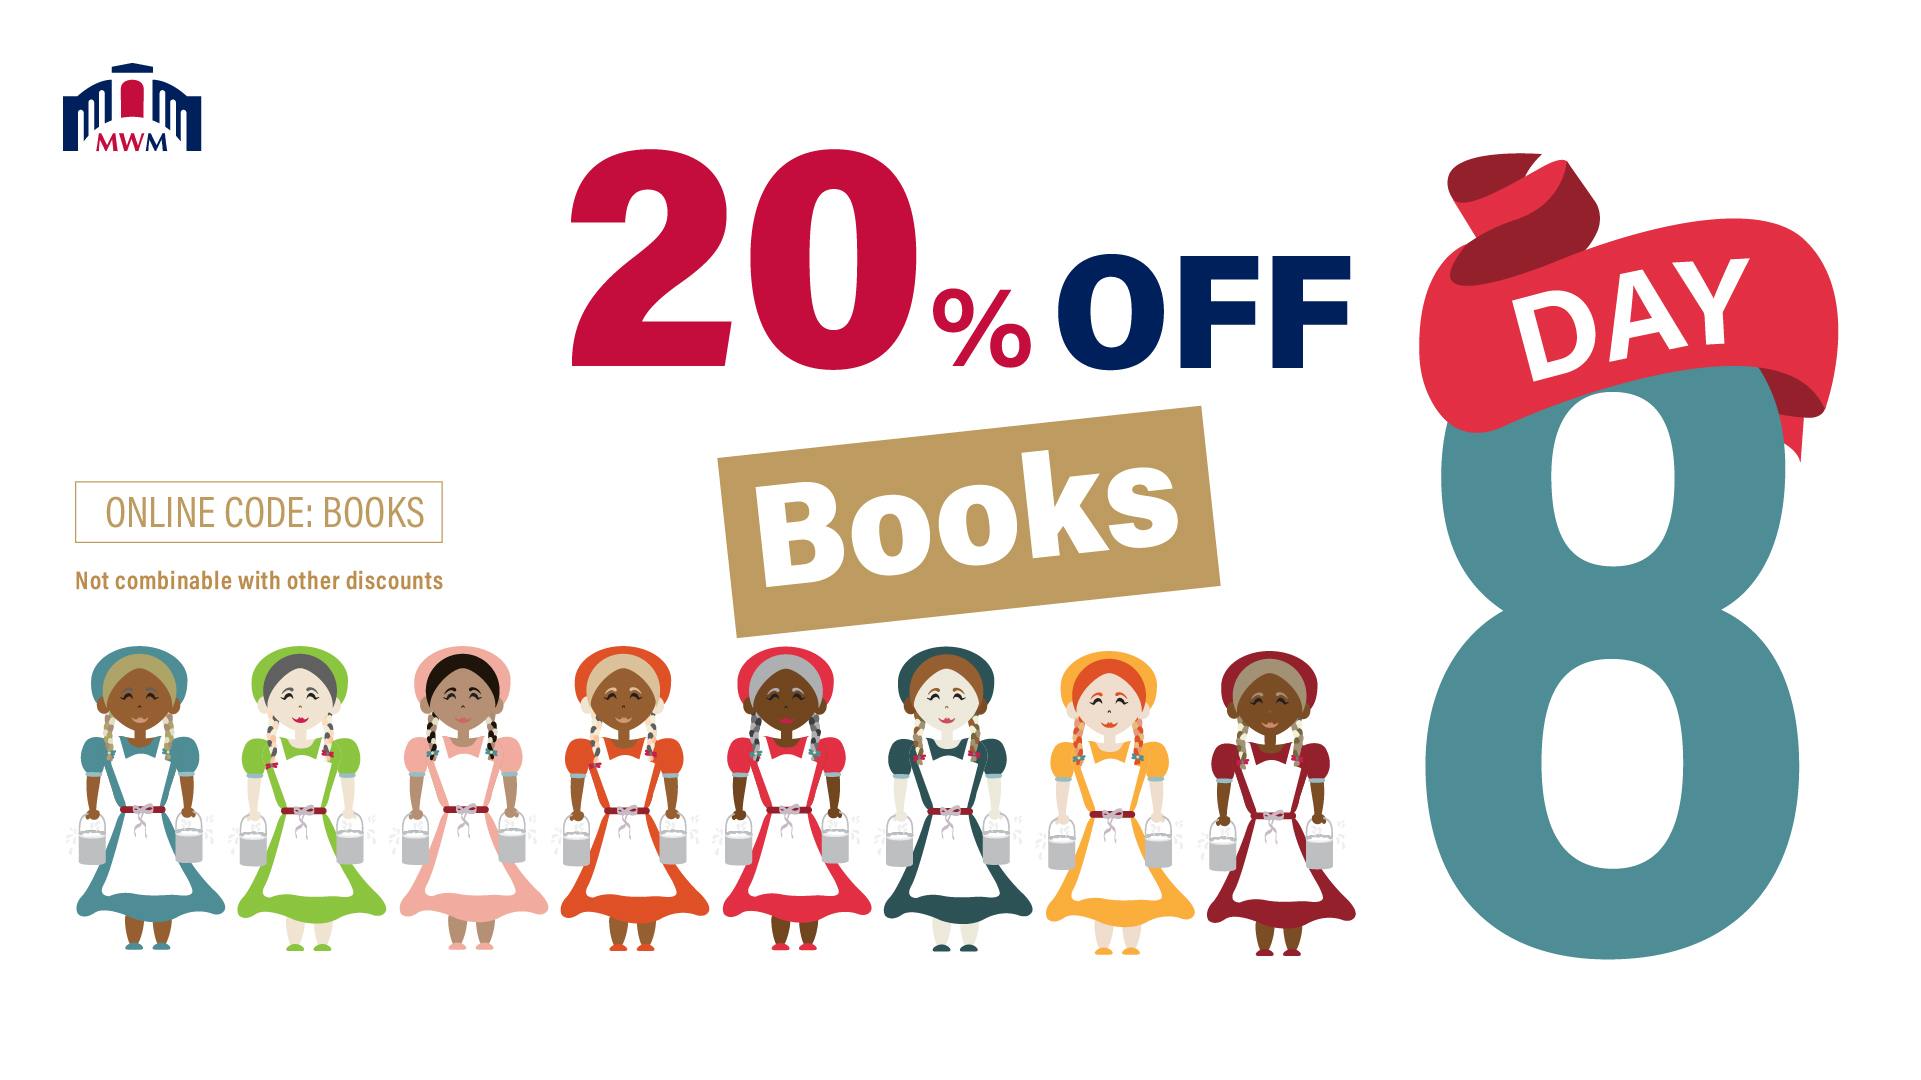 The Twelve Days of Christmas. Day 8 with eight maids a-milking. The words 20% off books.